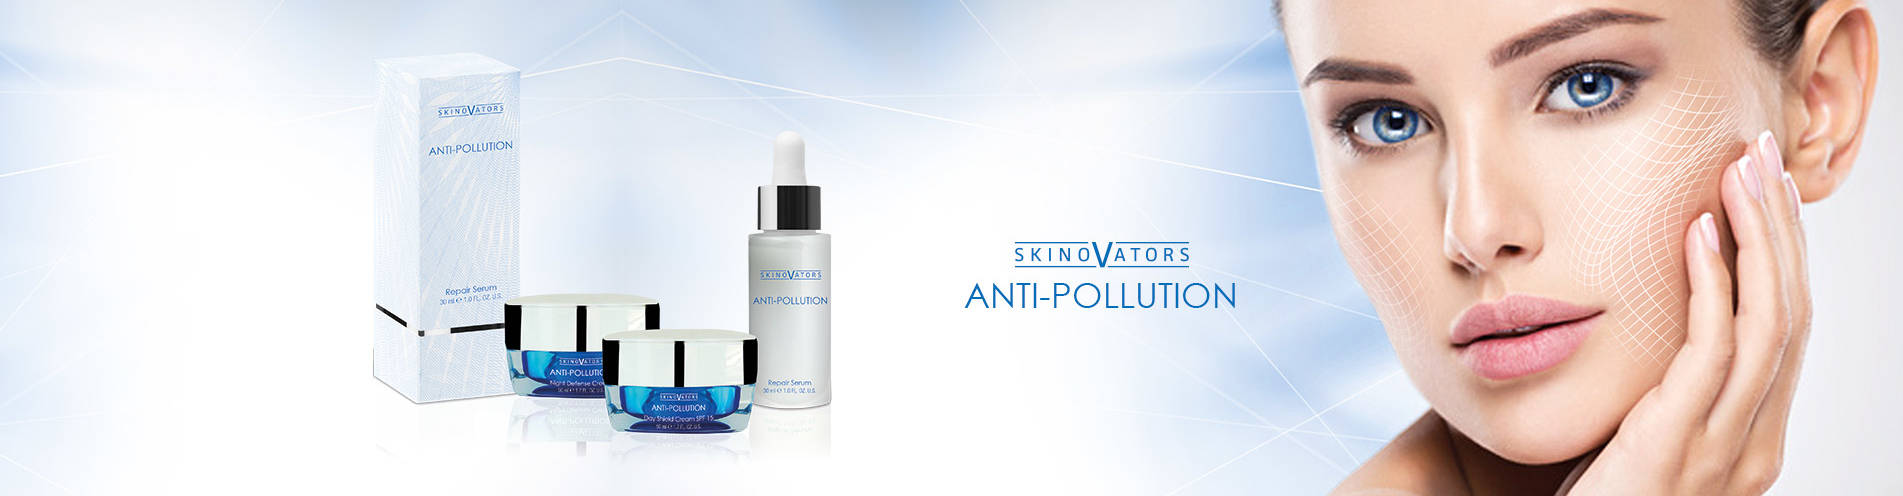 Your brand name or label on Anti Pollution Private Label Cosmetics German Manufacturer